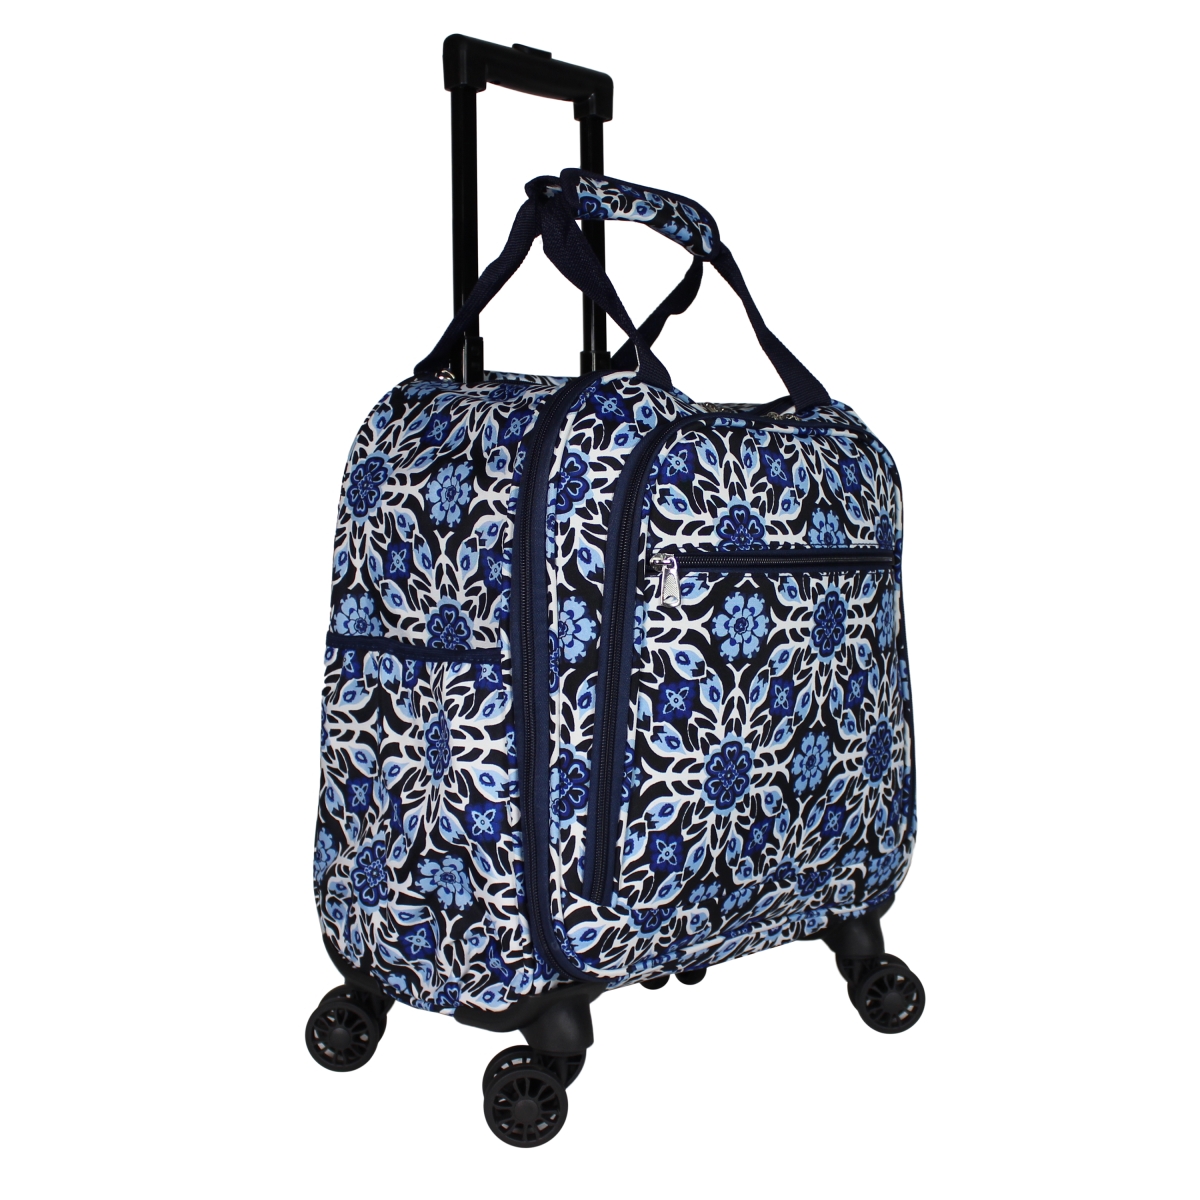 815501-213 18 In. Prints Spinner Carry-on Luggage, Winter Flower